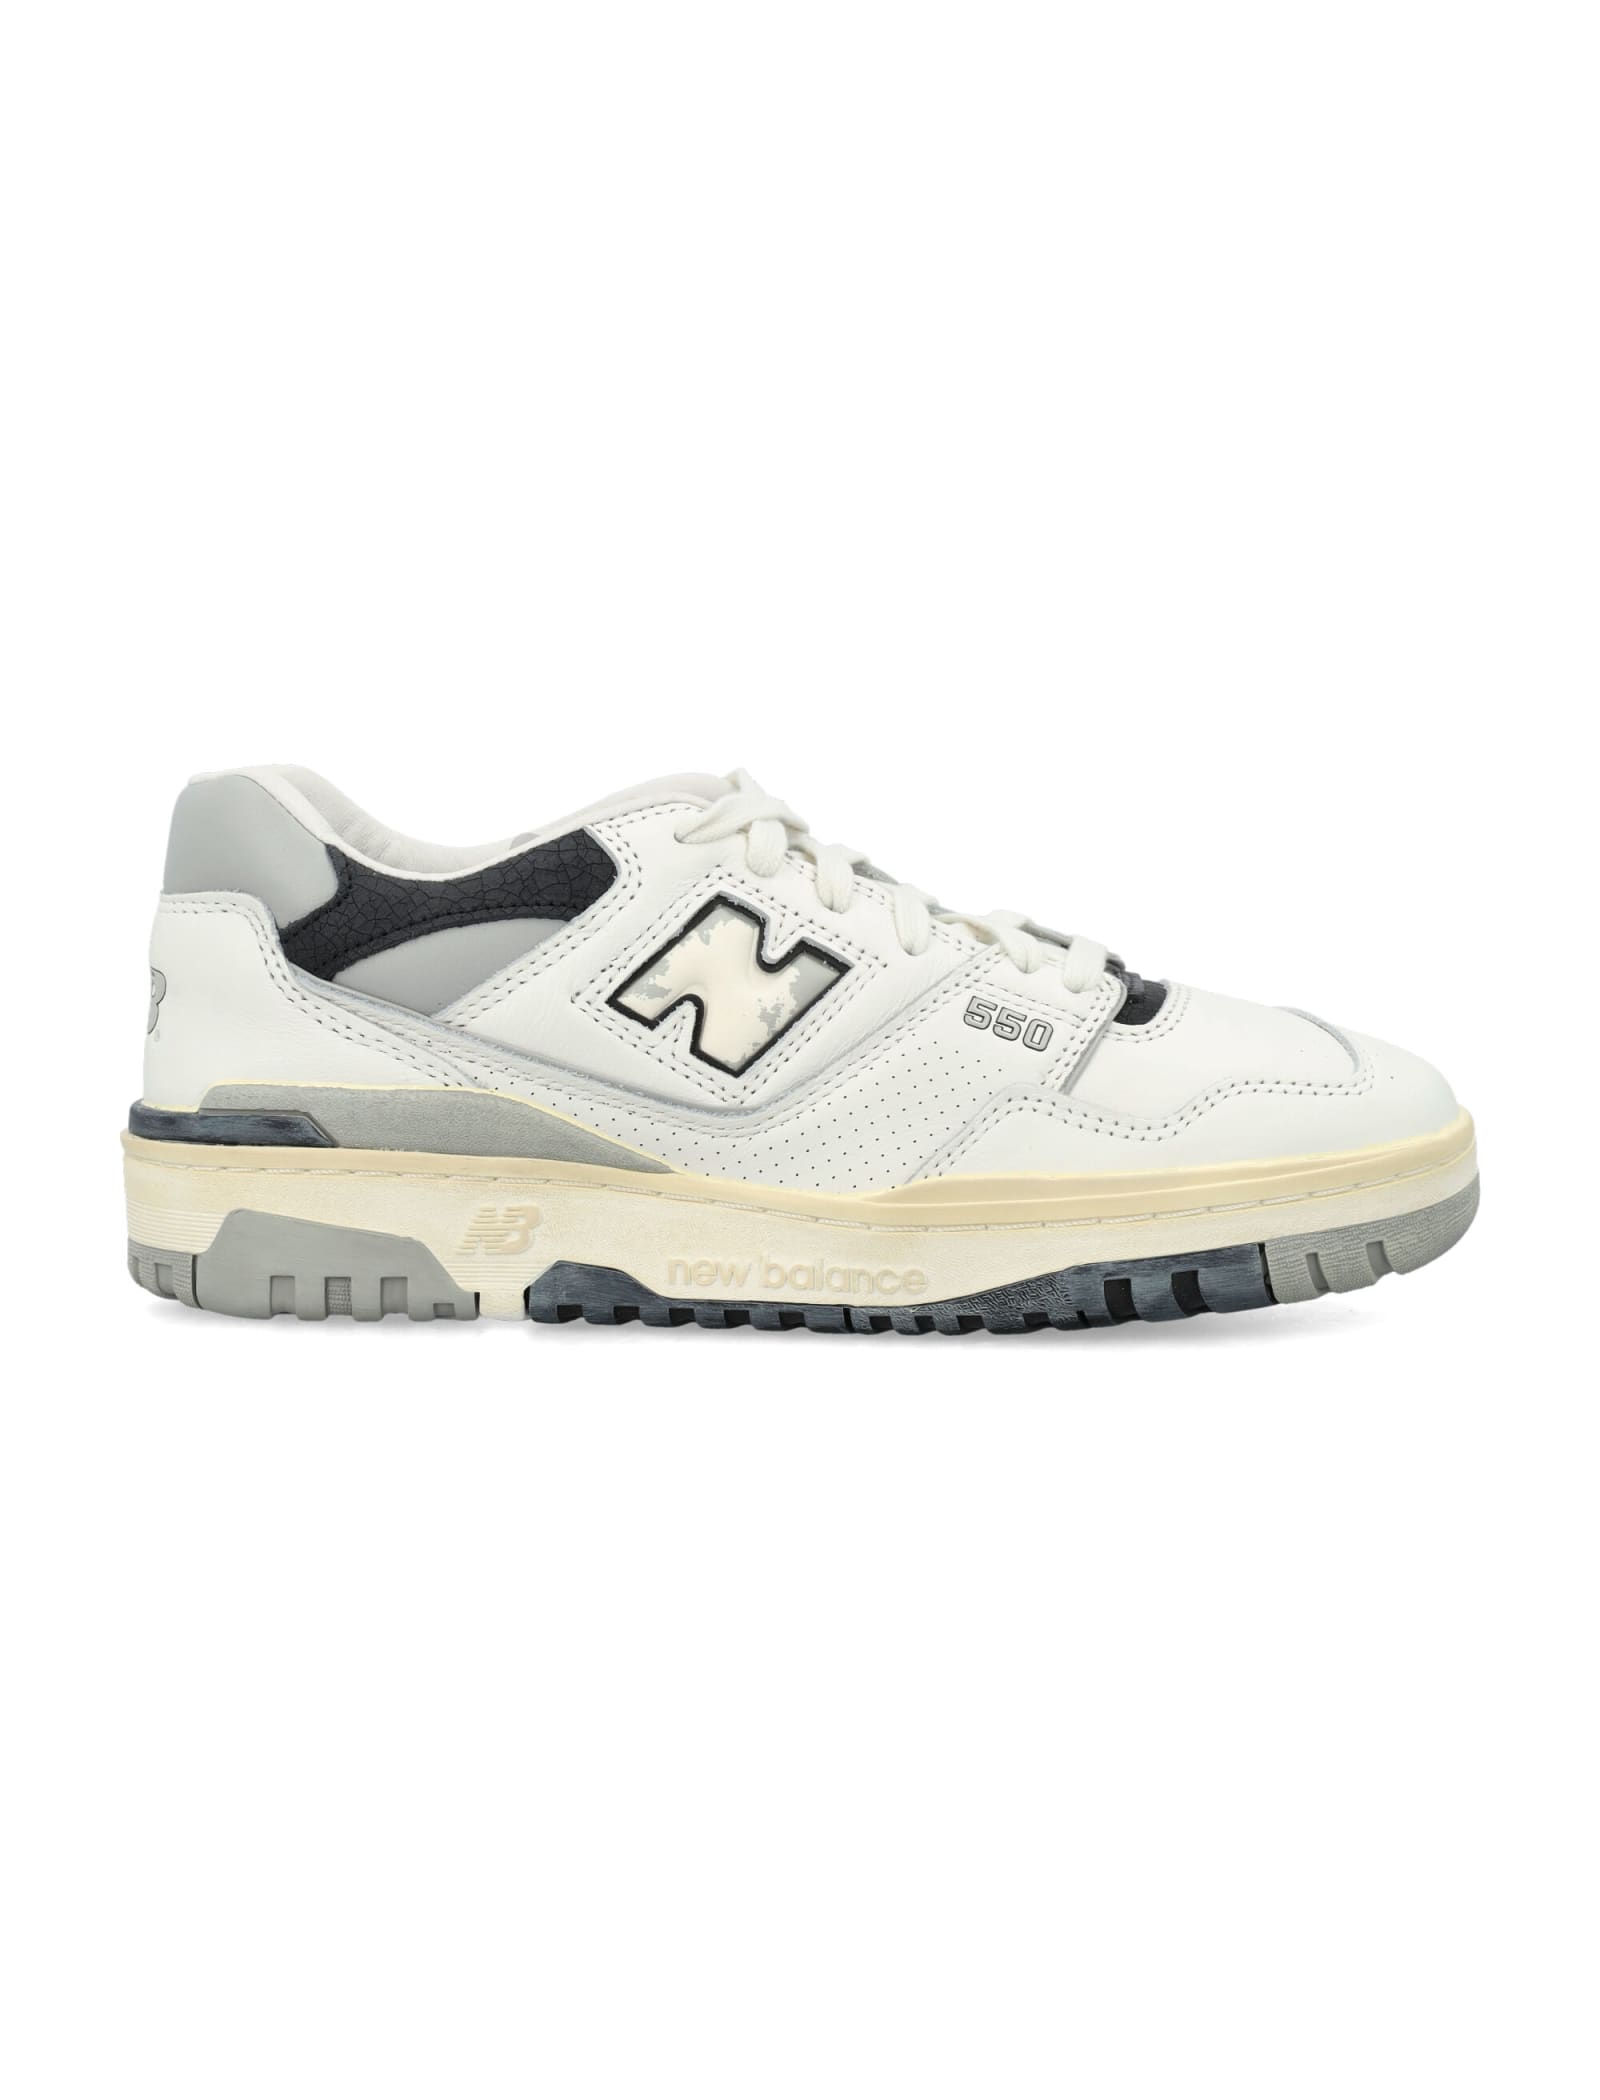 Shop New Balance 550 Sneakers In White Grey